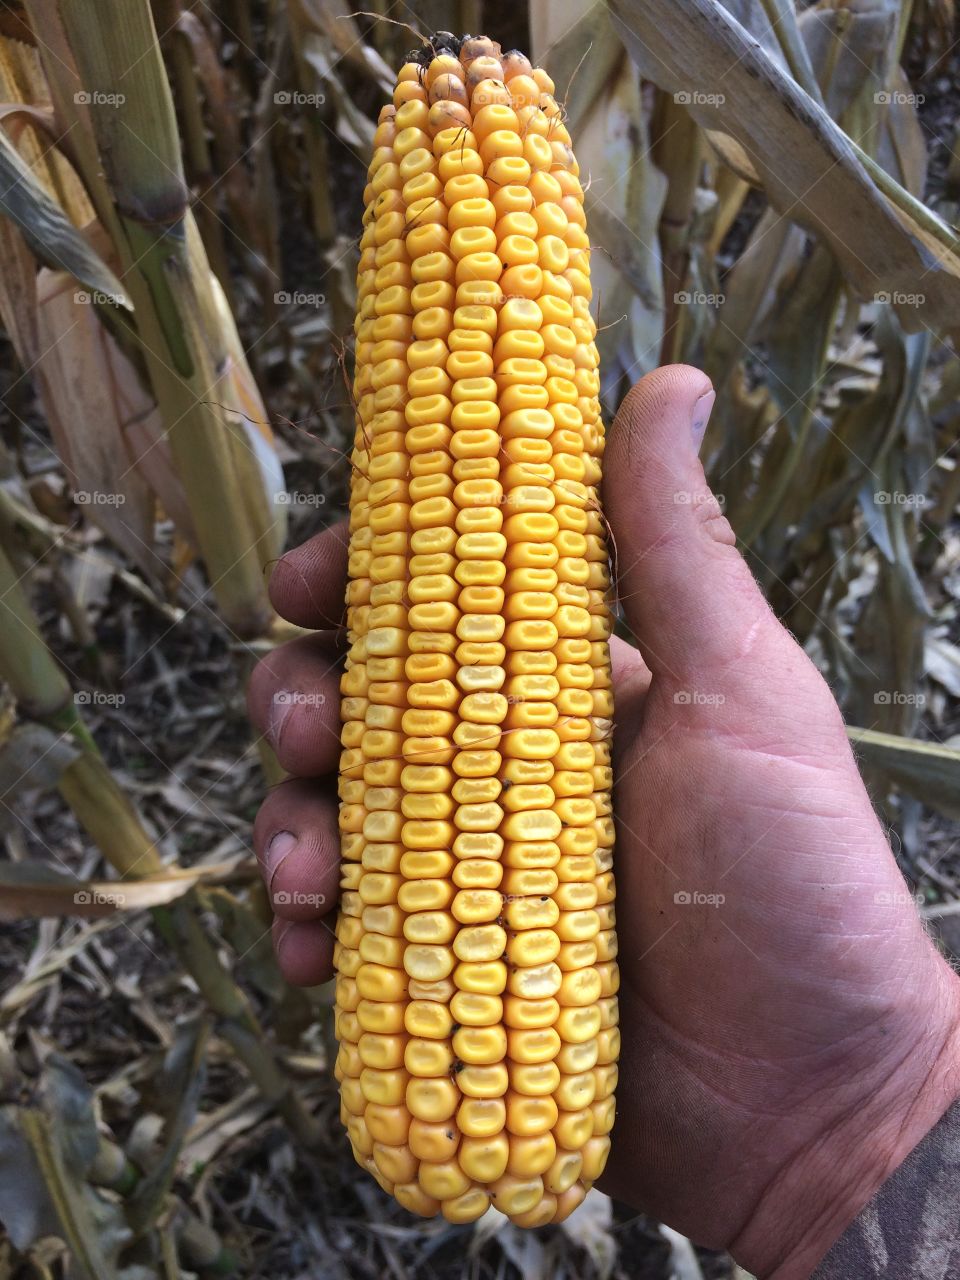 Corn cob almost ready for harvest 